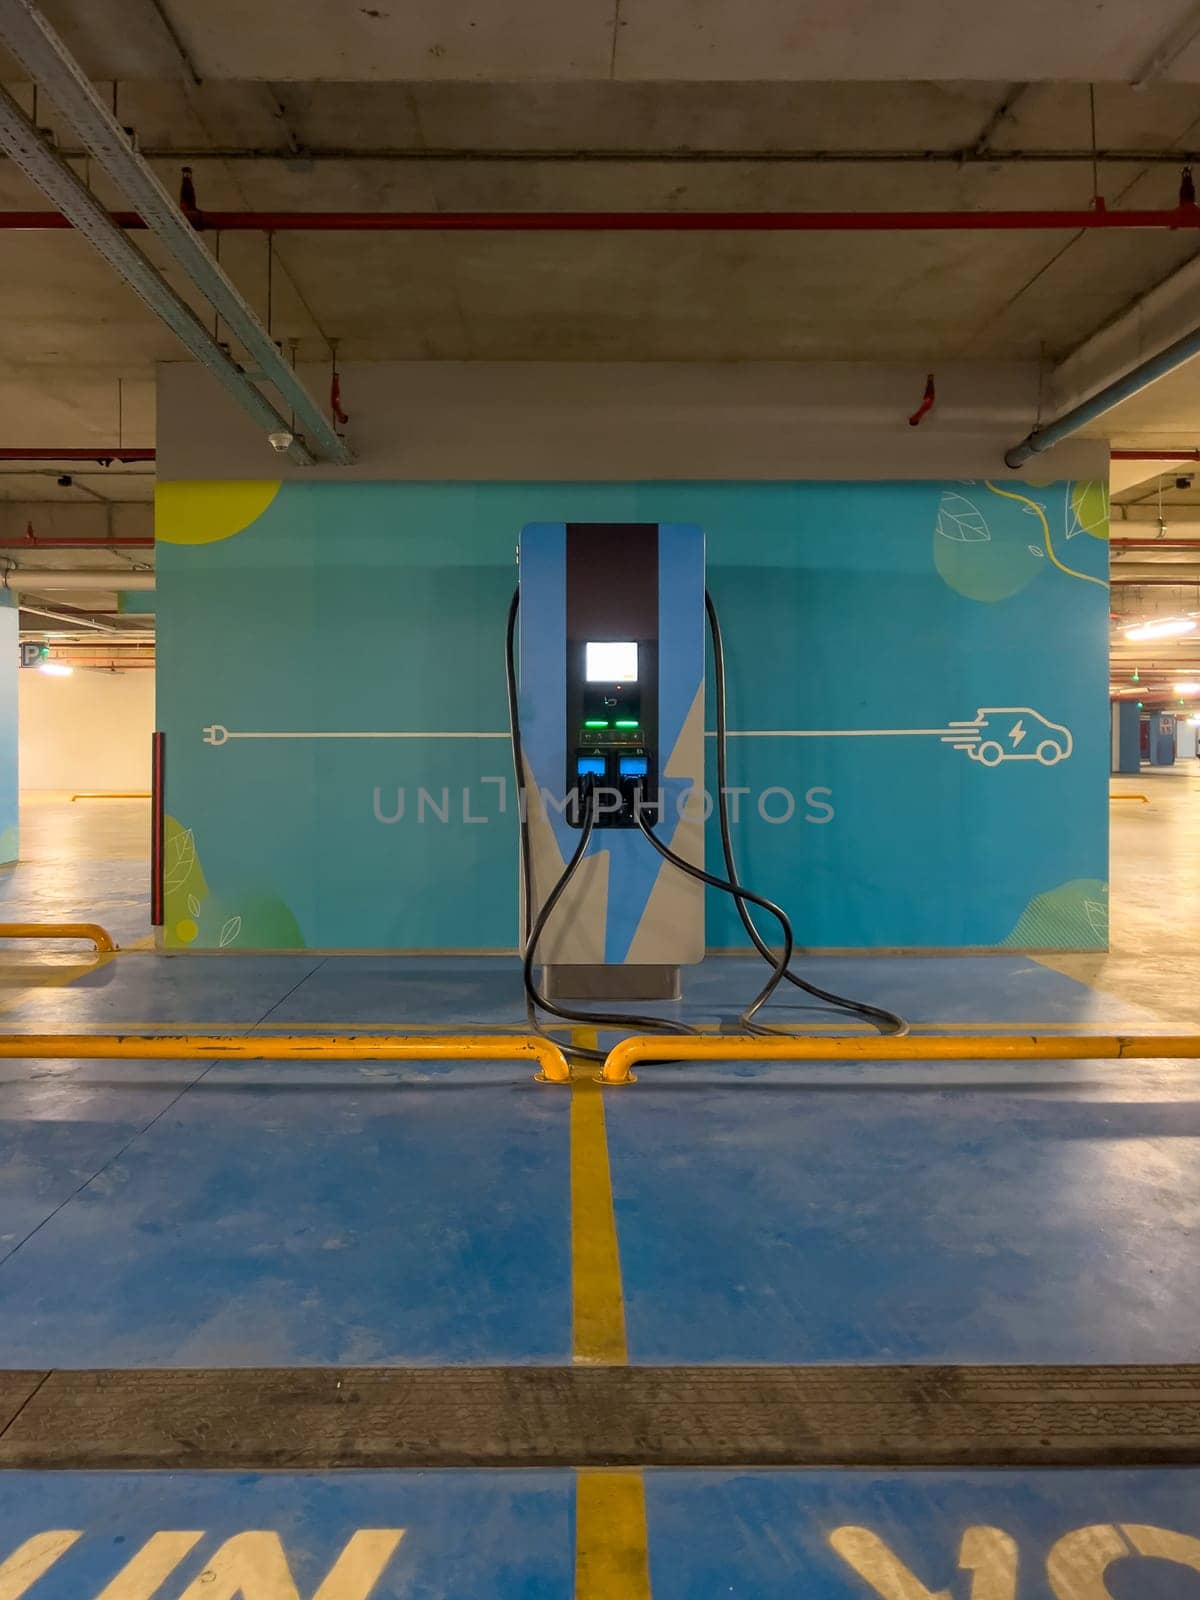 DC charging station to charge electric vehicles in the parking garage of the shopping mall